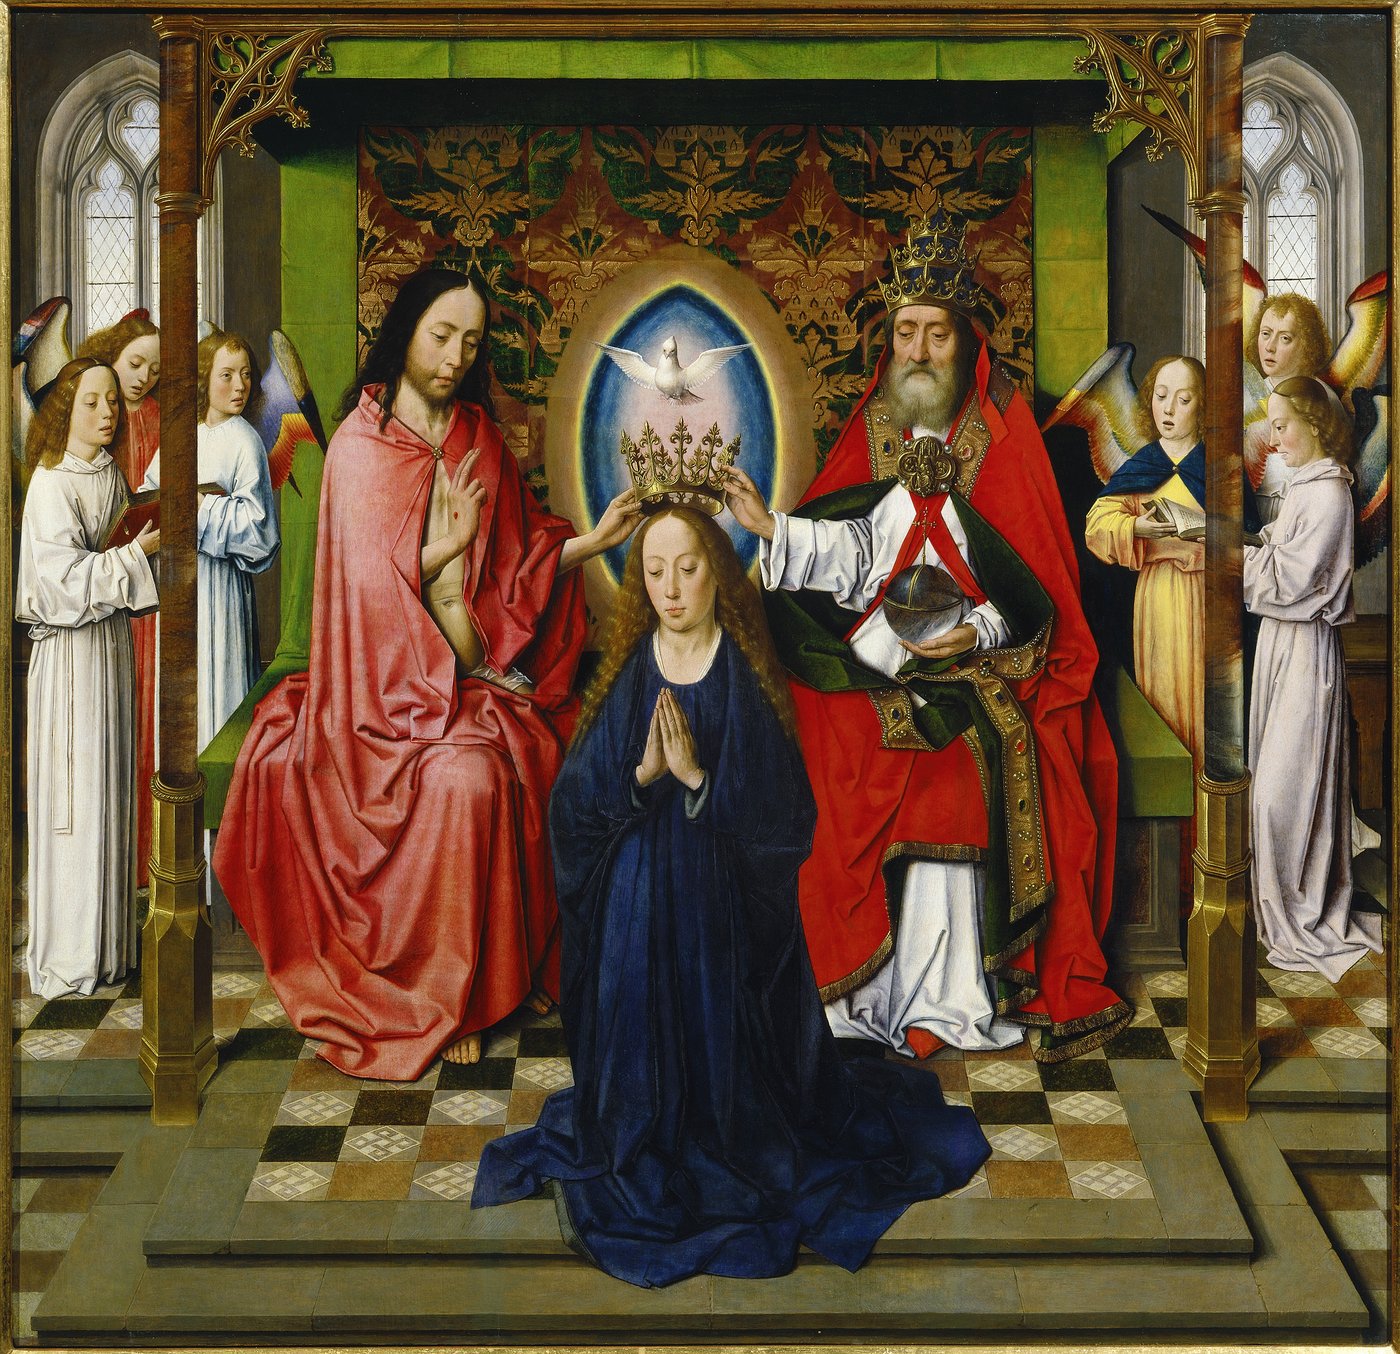 A historical painting, depiction of the coronation of Mary, a woman with long hair kneels under a canopy above her the crown and white dove, to the left and right of her a priest and Jesus with gesture of blessing, in the background angelic figures singing in the choir.